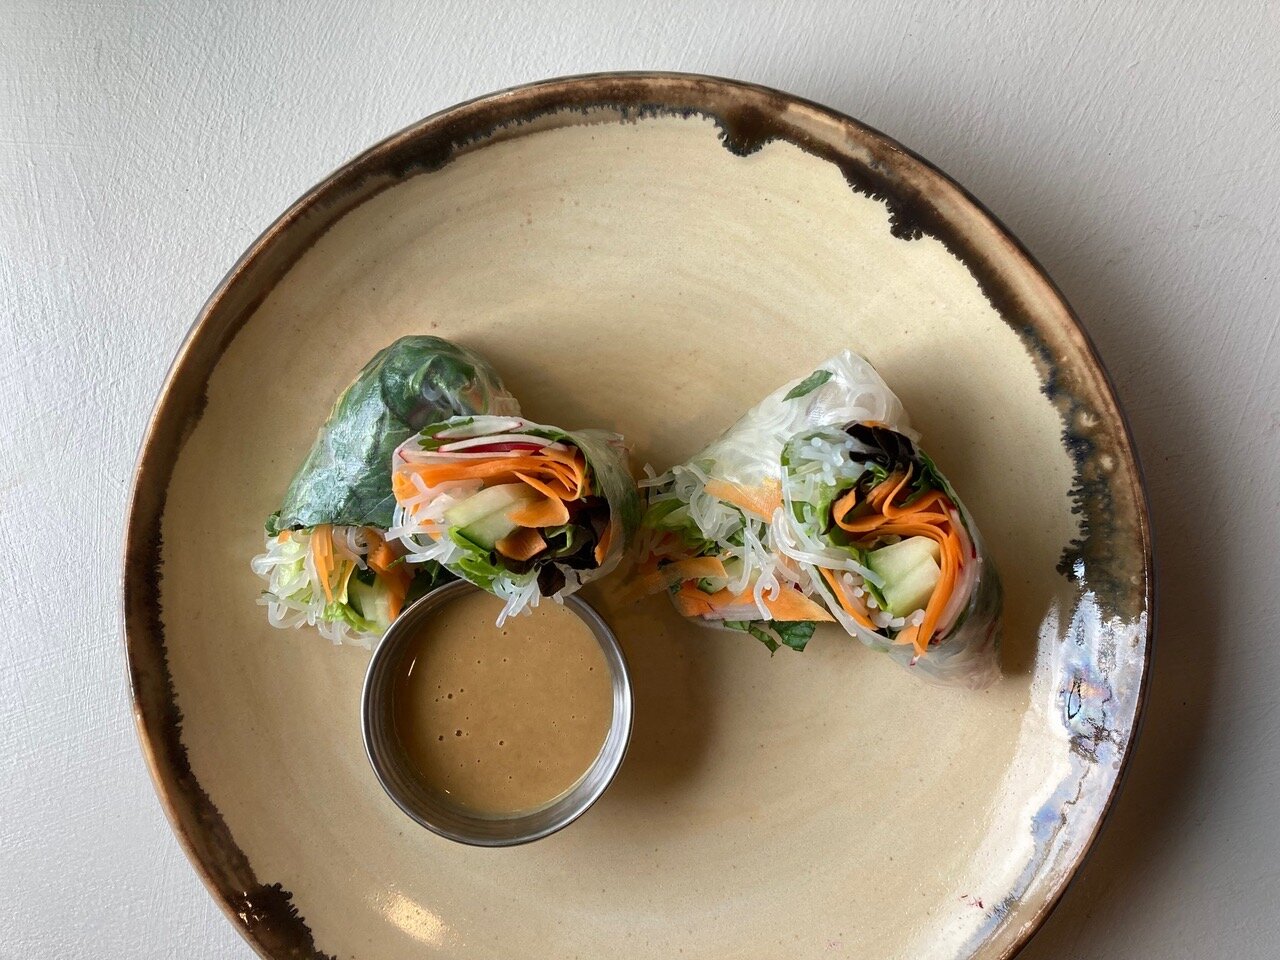 Gluten-free salad rolls are stuffed with local carrots, greens and radishes.